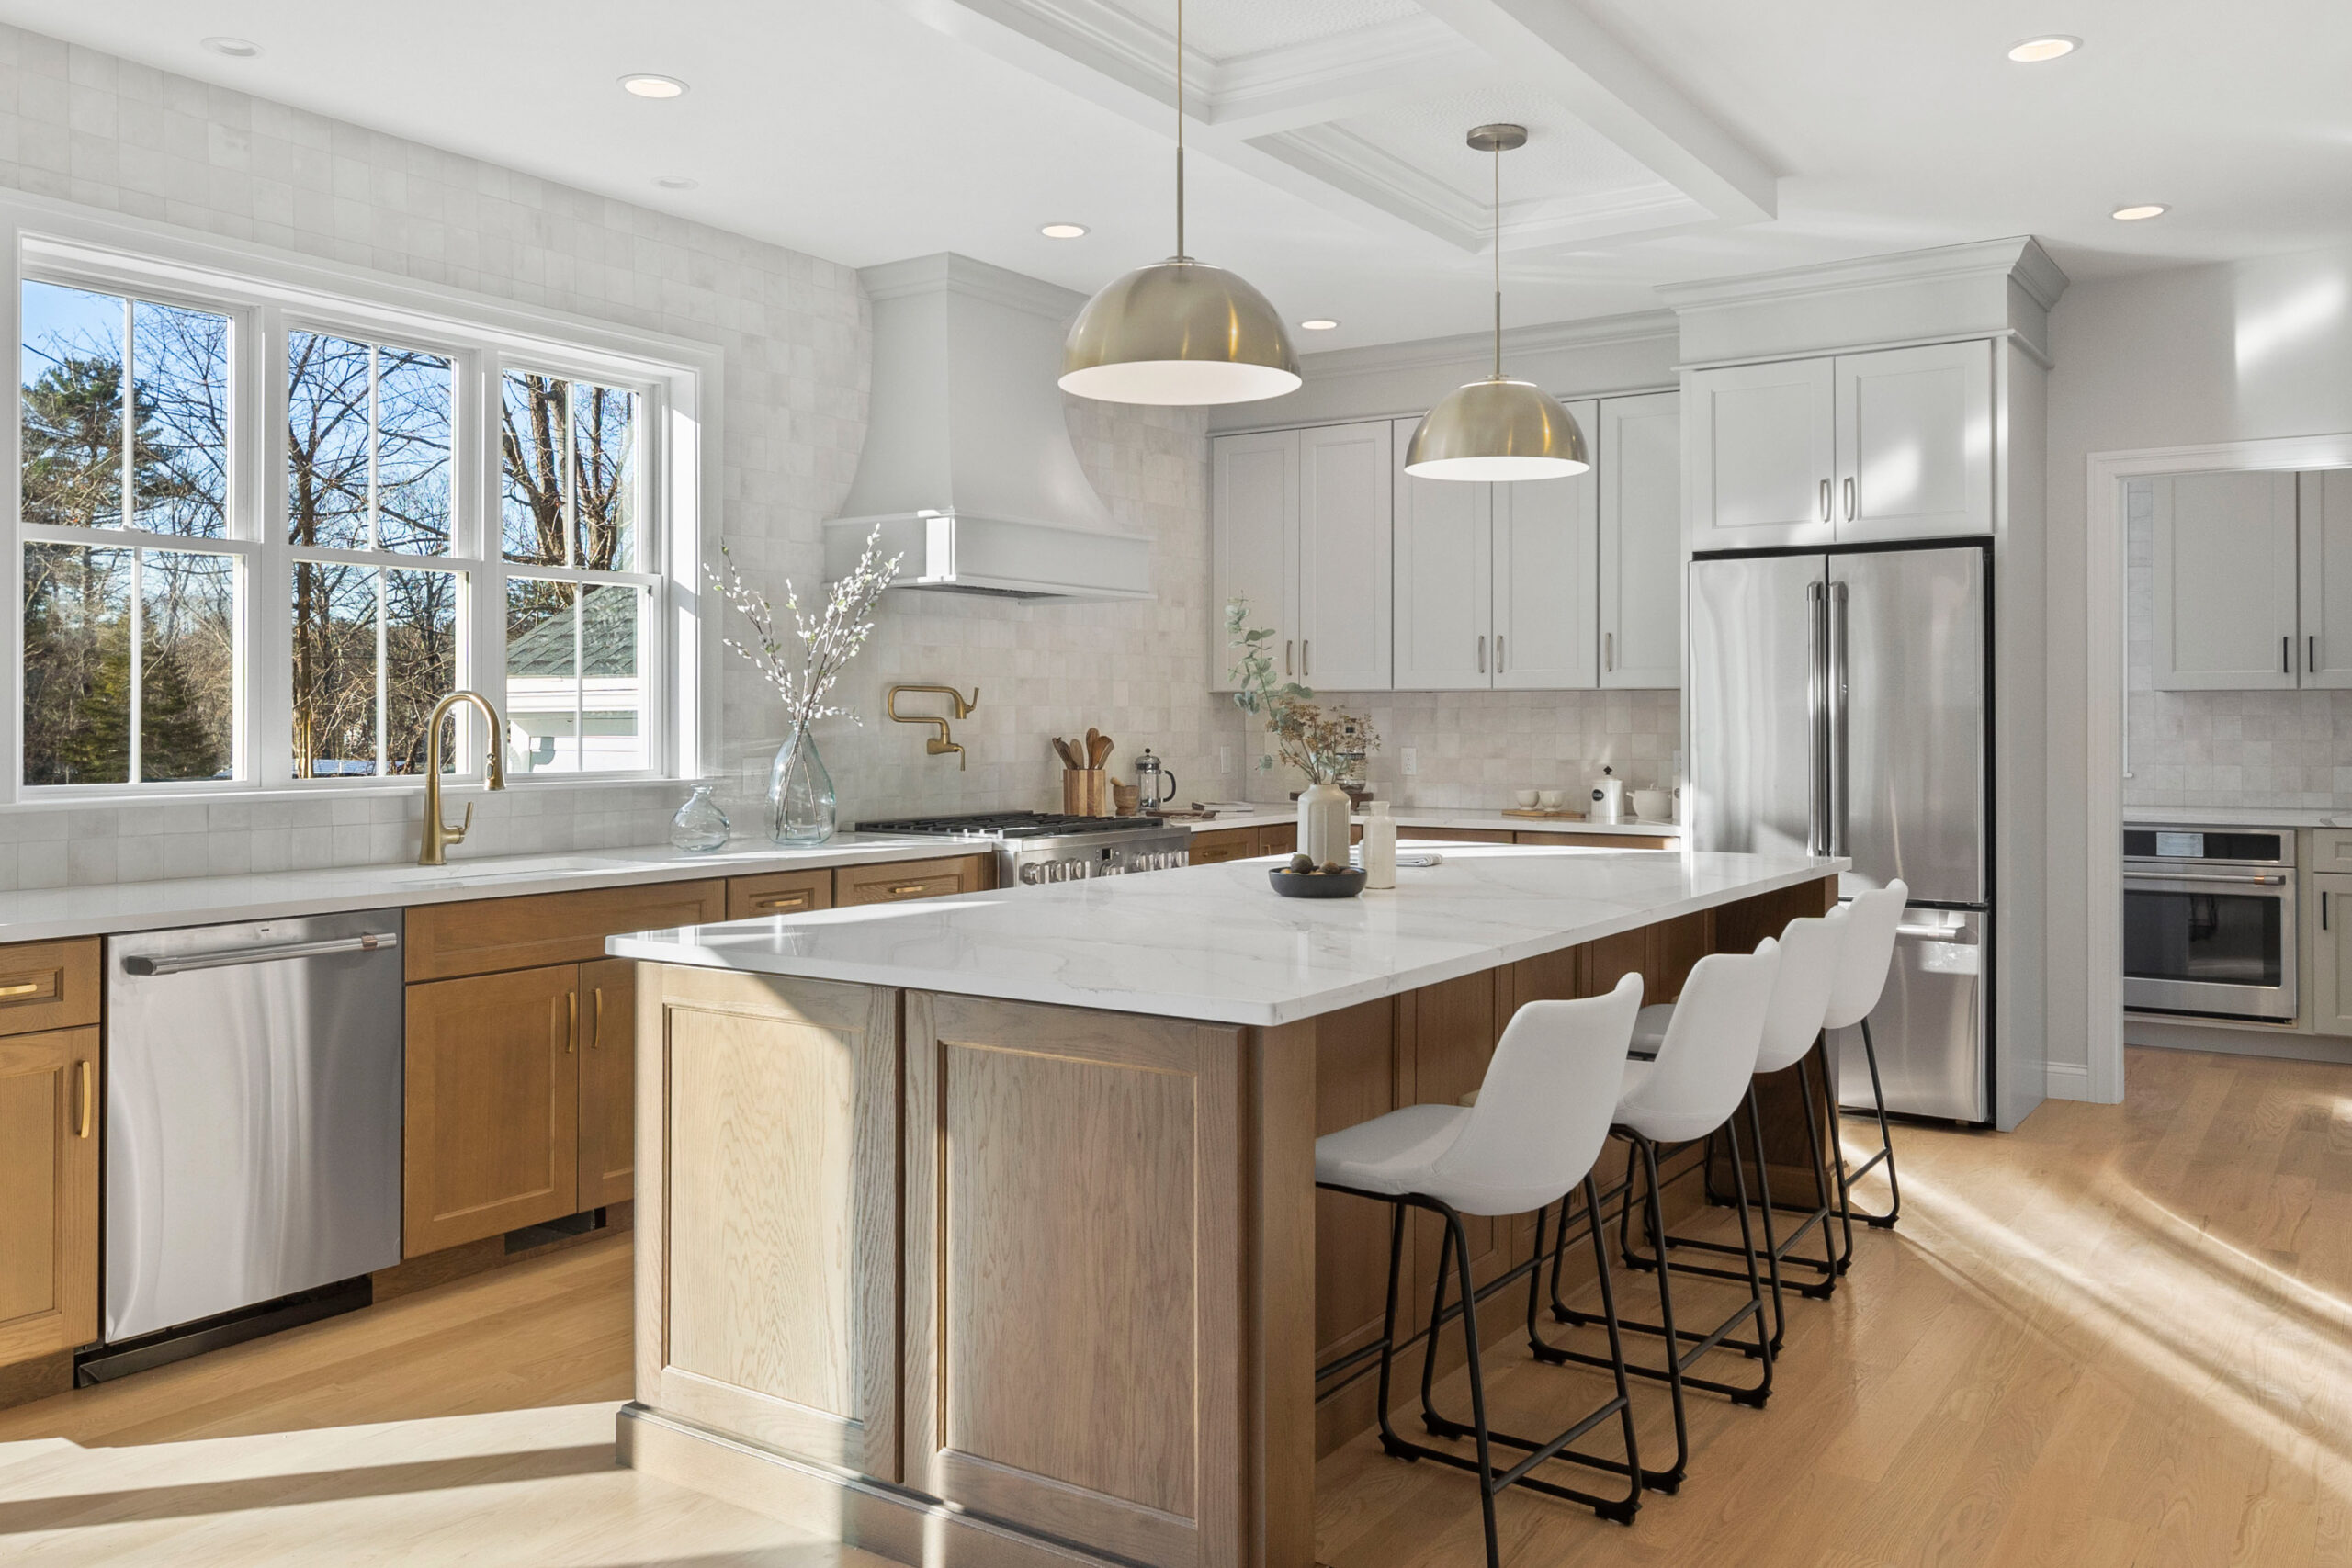 A spacious and modern kitchen with abundant natural light streaming through large windows that offer a view of bare trees and a clear sky. The kitchen features sleek white cabinetry and stainless steel appliances, including a refrigerator and built-in microwave. The centerpiece is a large kitchen island with light wood base cabinets and a white marble countertop, complemented by four white modern bar stools with black metal legs. Above the island, two large dome-shaped gold pendant lights add a touch of elegance. The backsplash is made of subway tiles, and gold fixtures and cabinet pulls match the lighting. The room has a coffered ceiling with recessed lighting and the floor is laid with light hardwood, reflecting the sunlight beautifully.